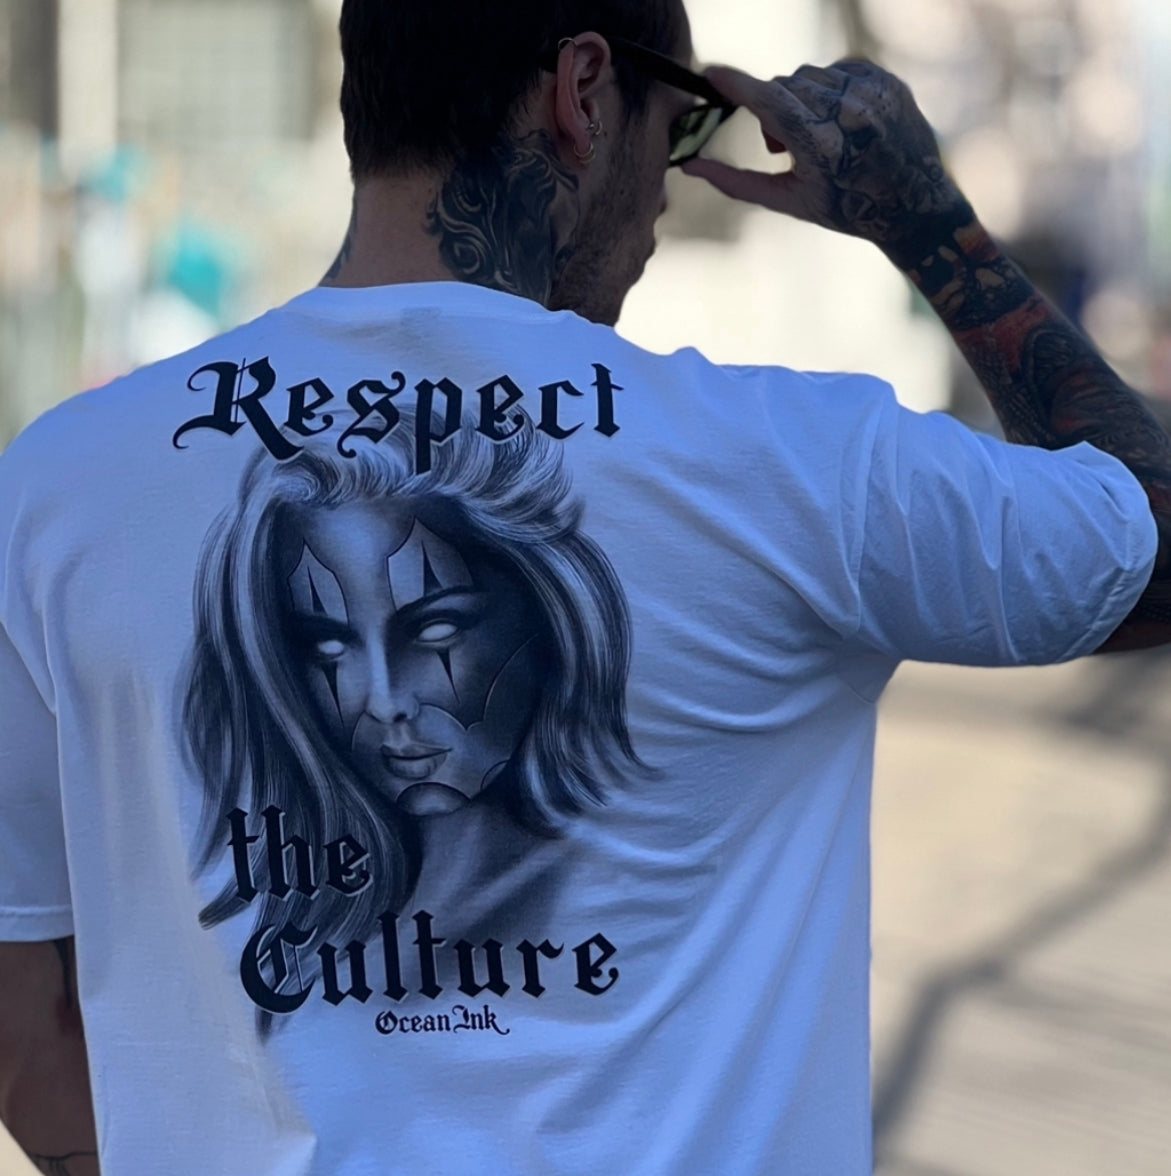 Respect the Culture - Heavyweight